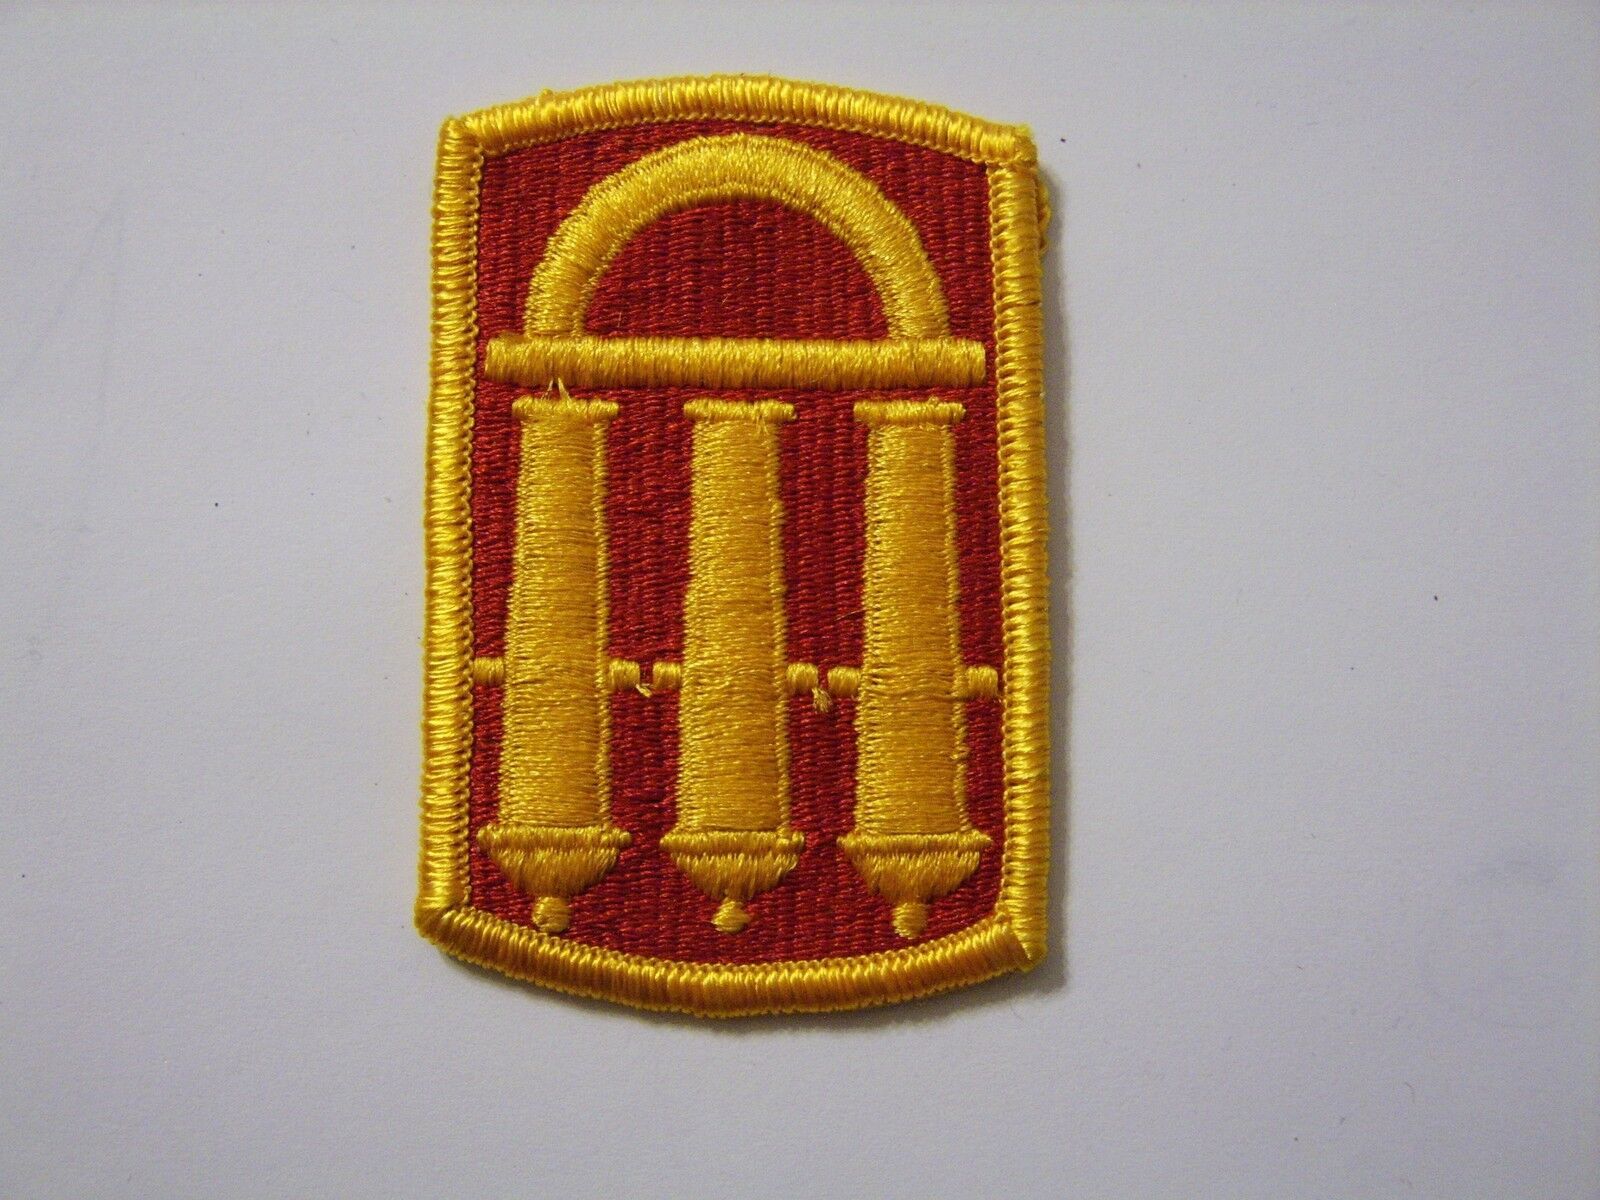 Primary image for ARMY PATCH - 118th FIELD ARTILLERY BRIGADE FULL COLOR